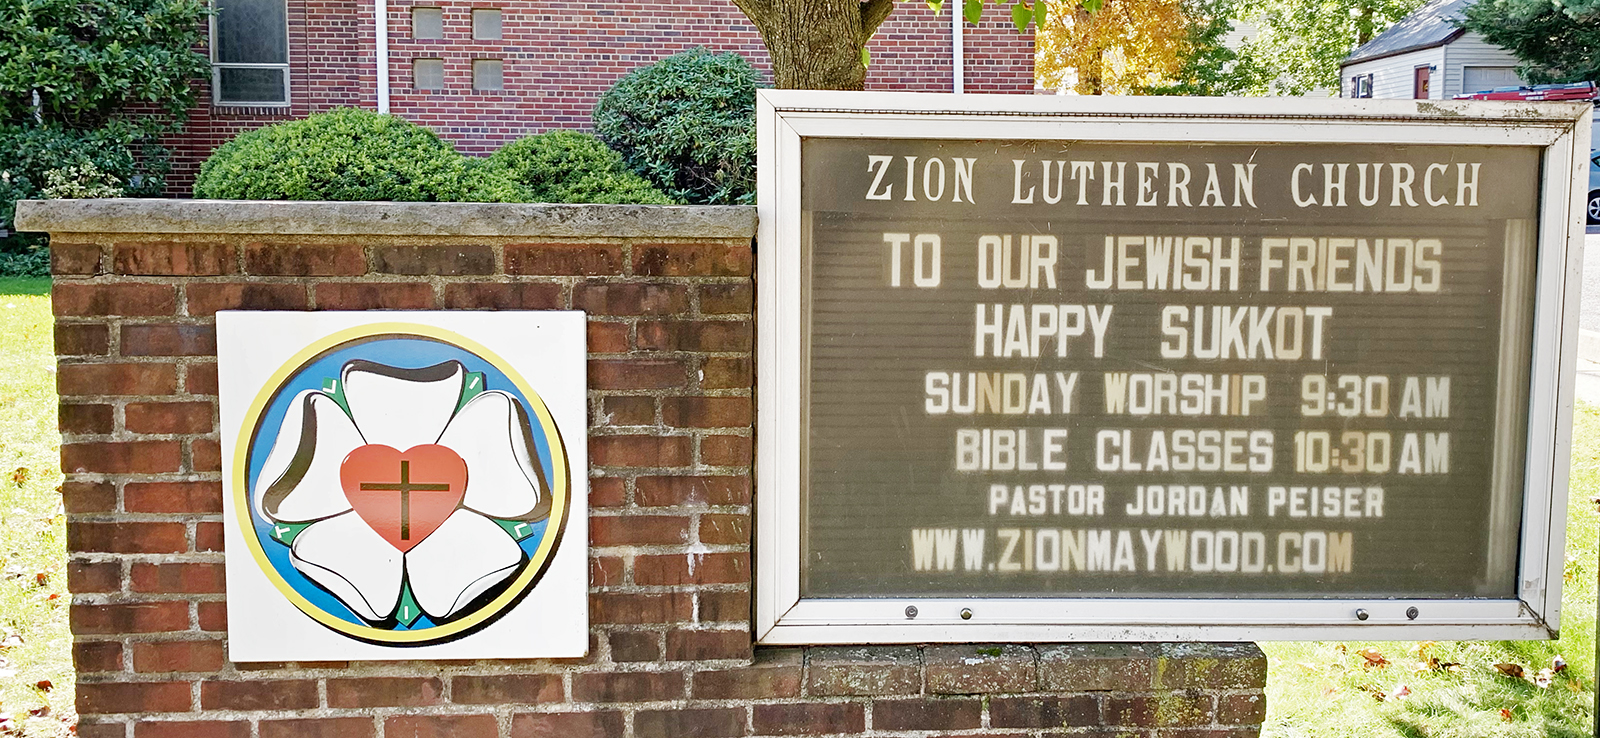 The church announcements board outside Zion Lutheran Church, Mayfield New Jersey, wishing the community a happy Sukkot.